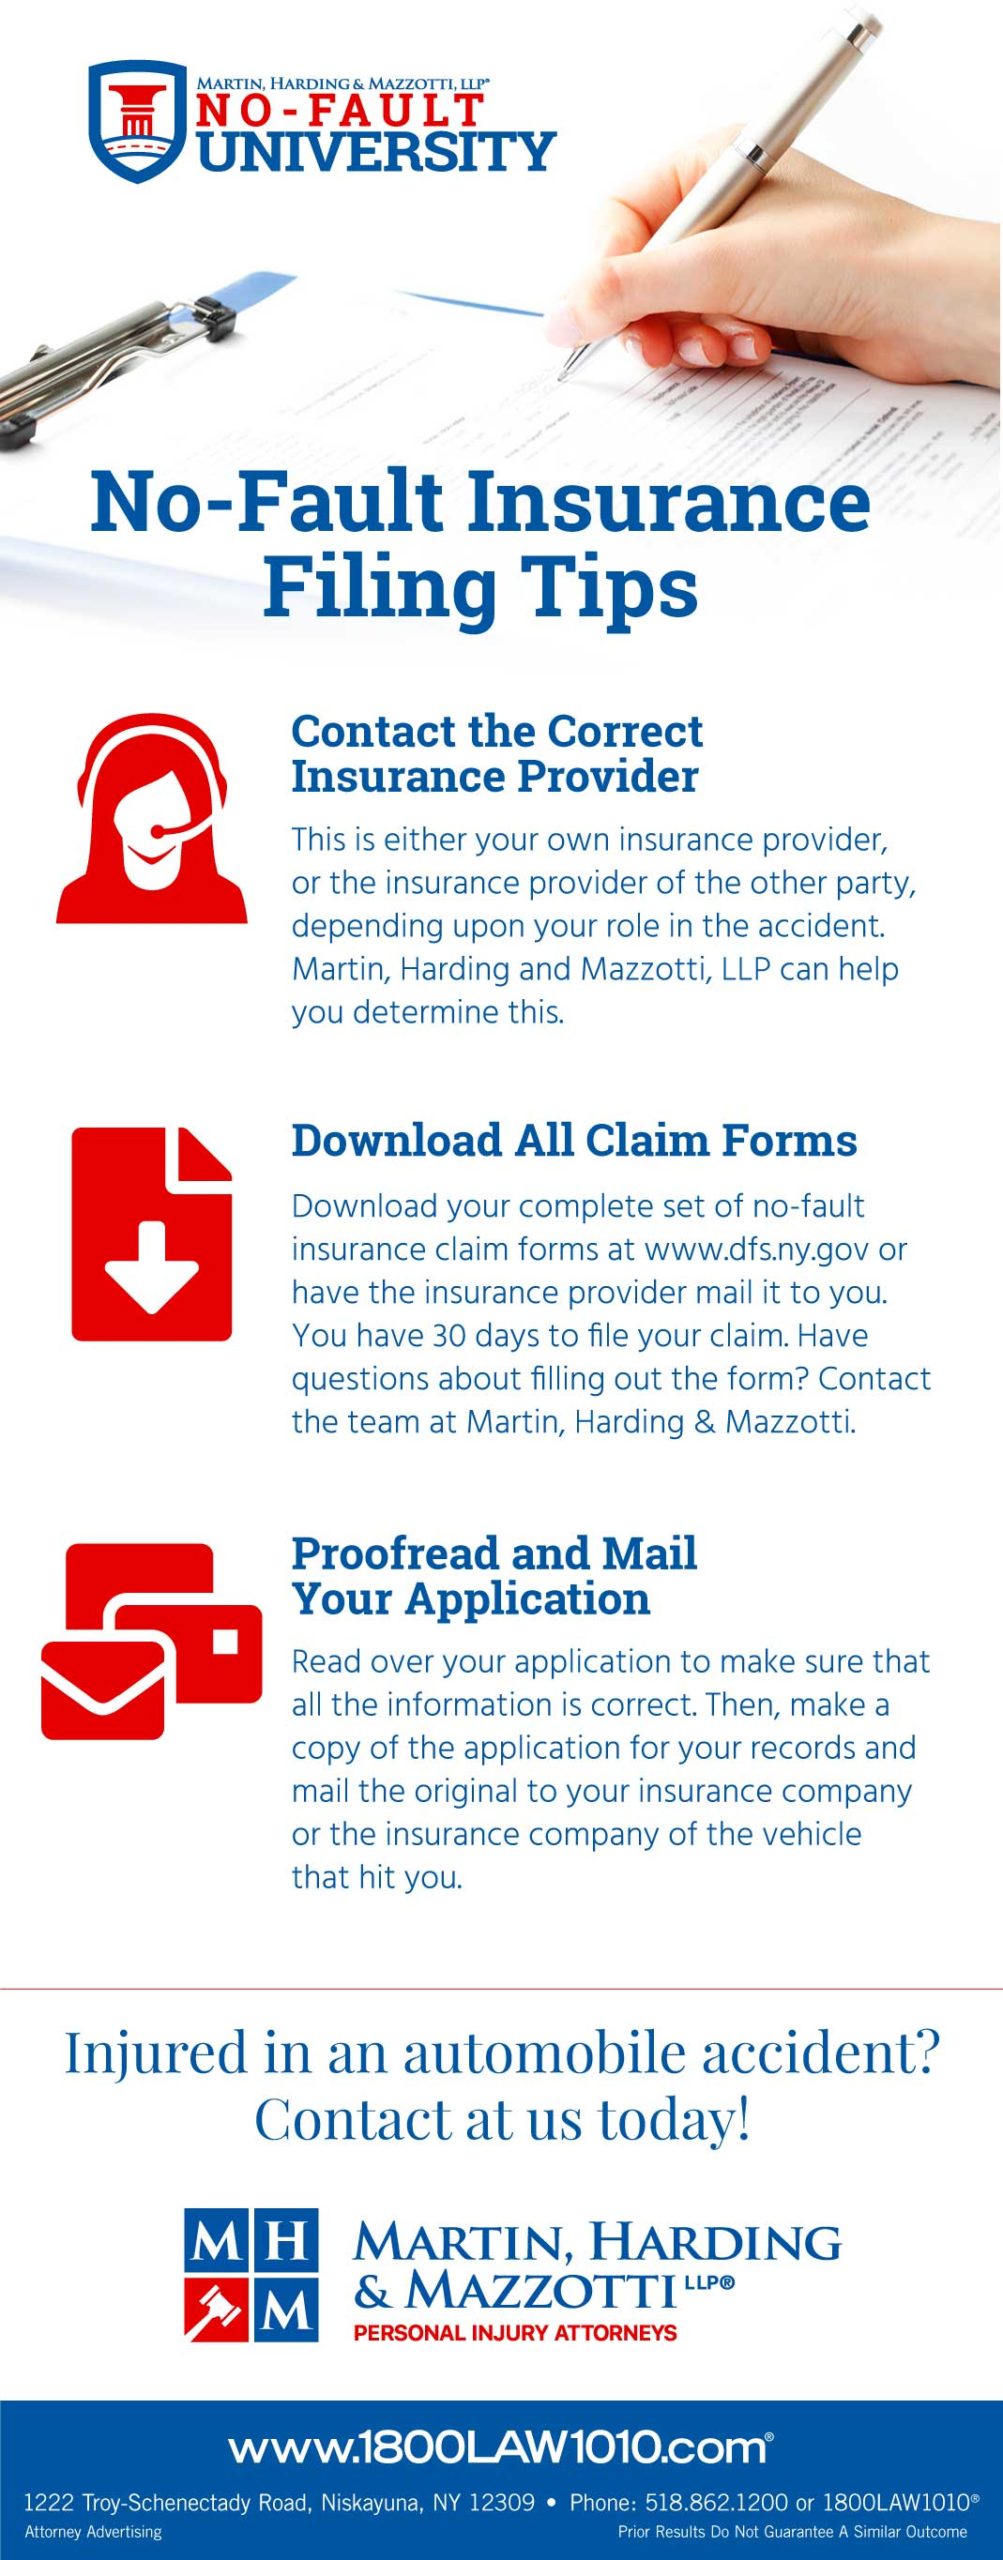 Infographic: Filing Tips for No Fault Insurance in NYS